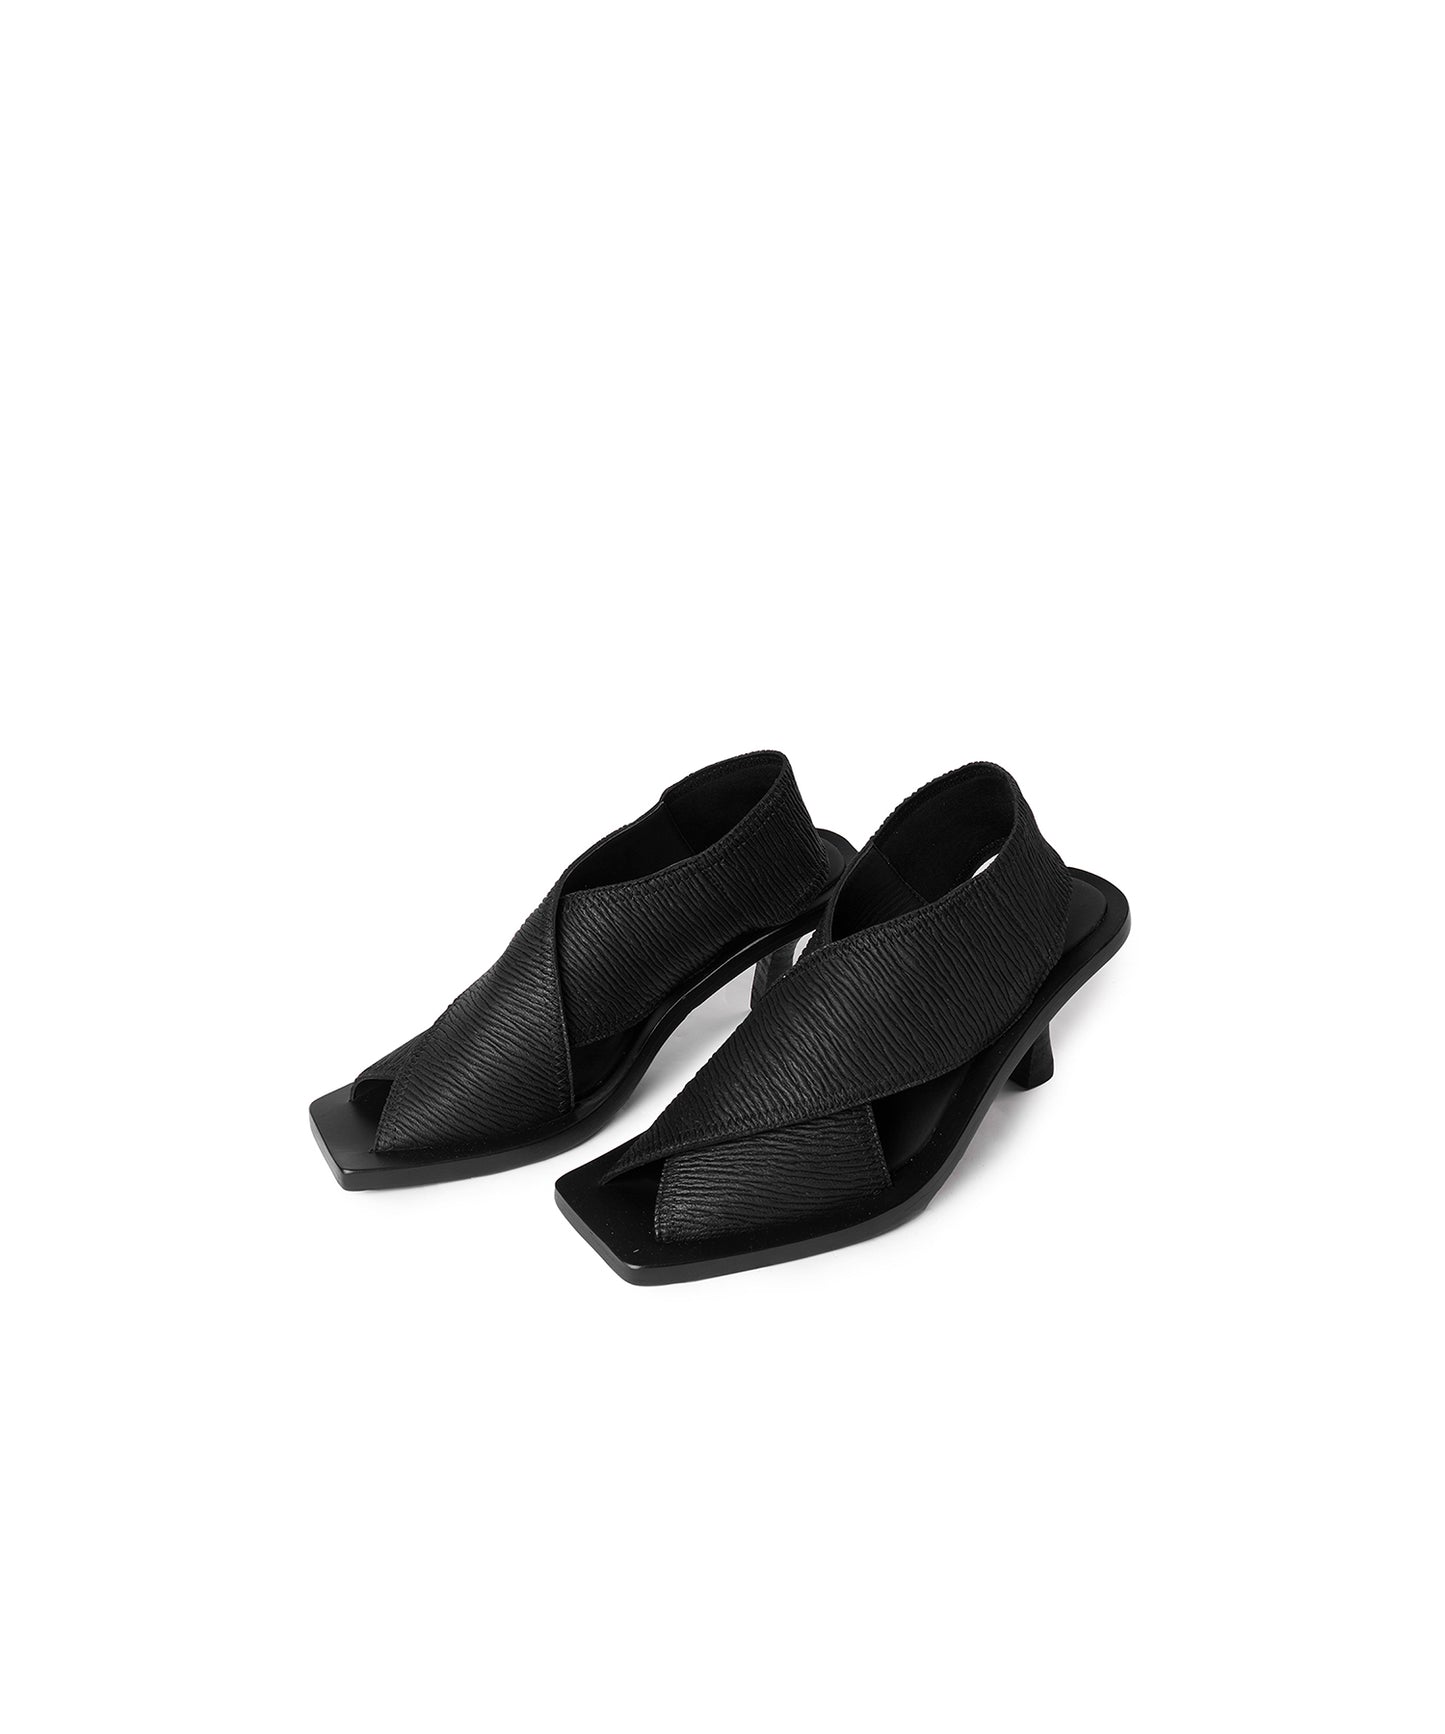 Crossover Square-toe Leather Heel Sandals